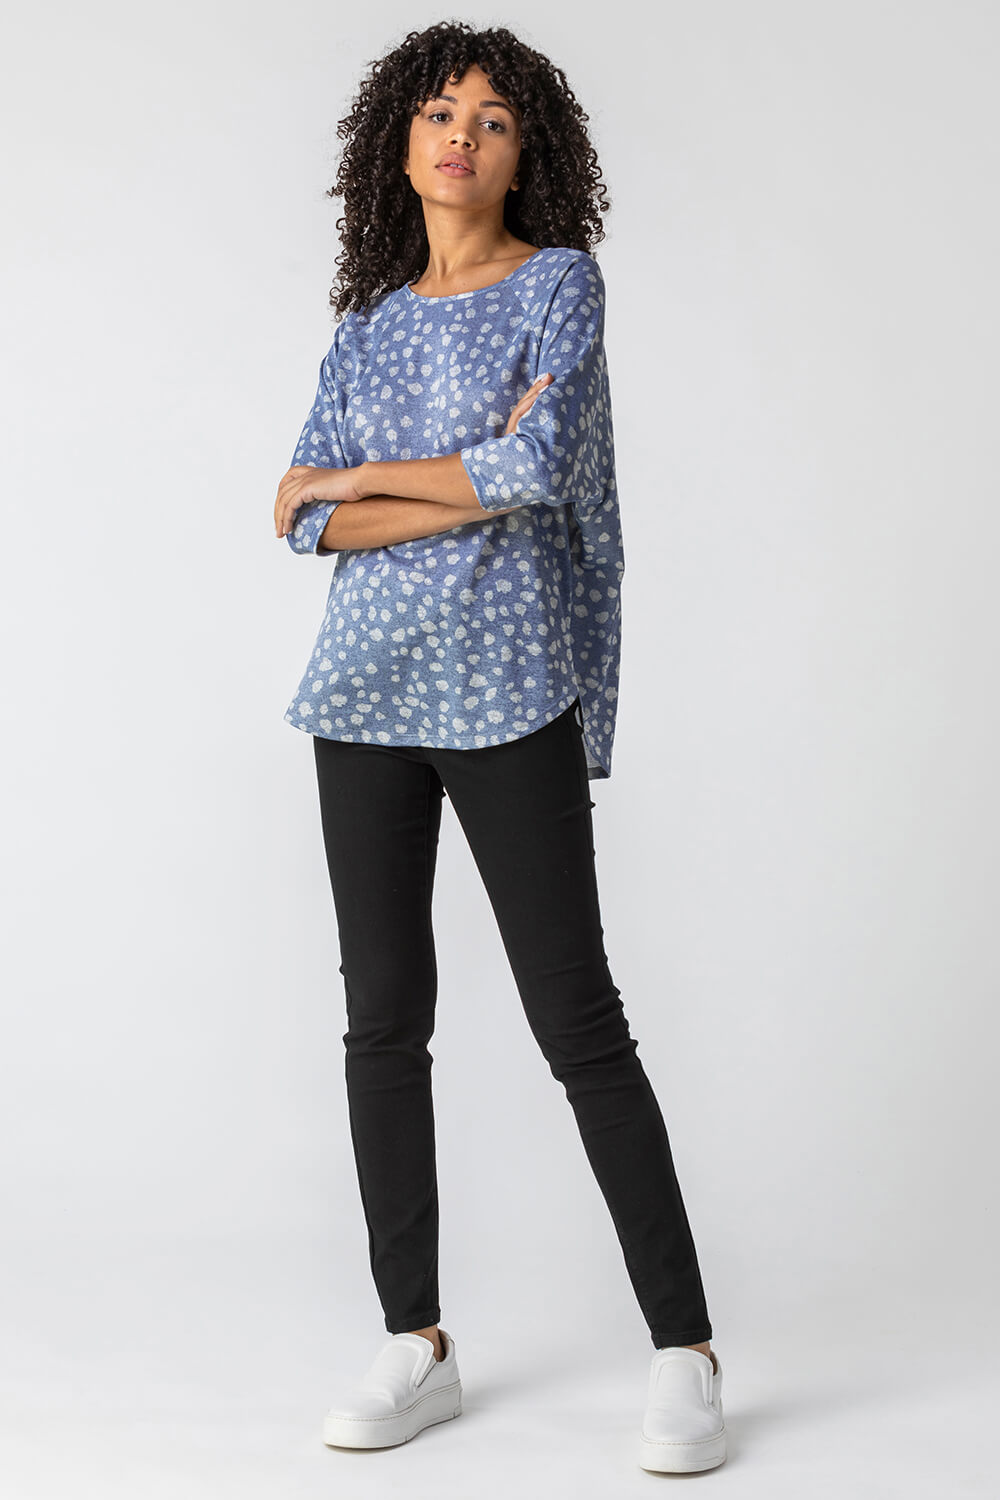 Blue Abstract Spot Print Jersey Top, Image 3 of 5